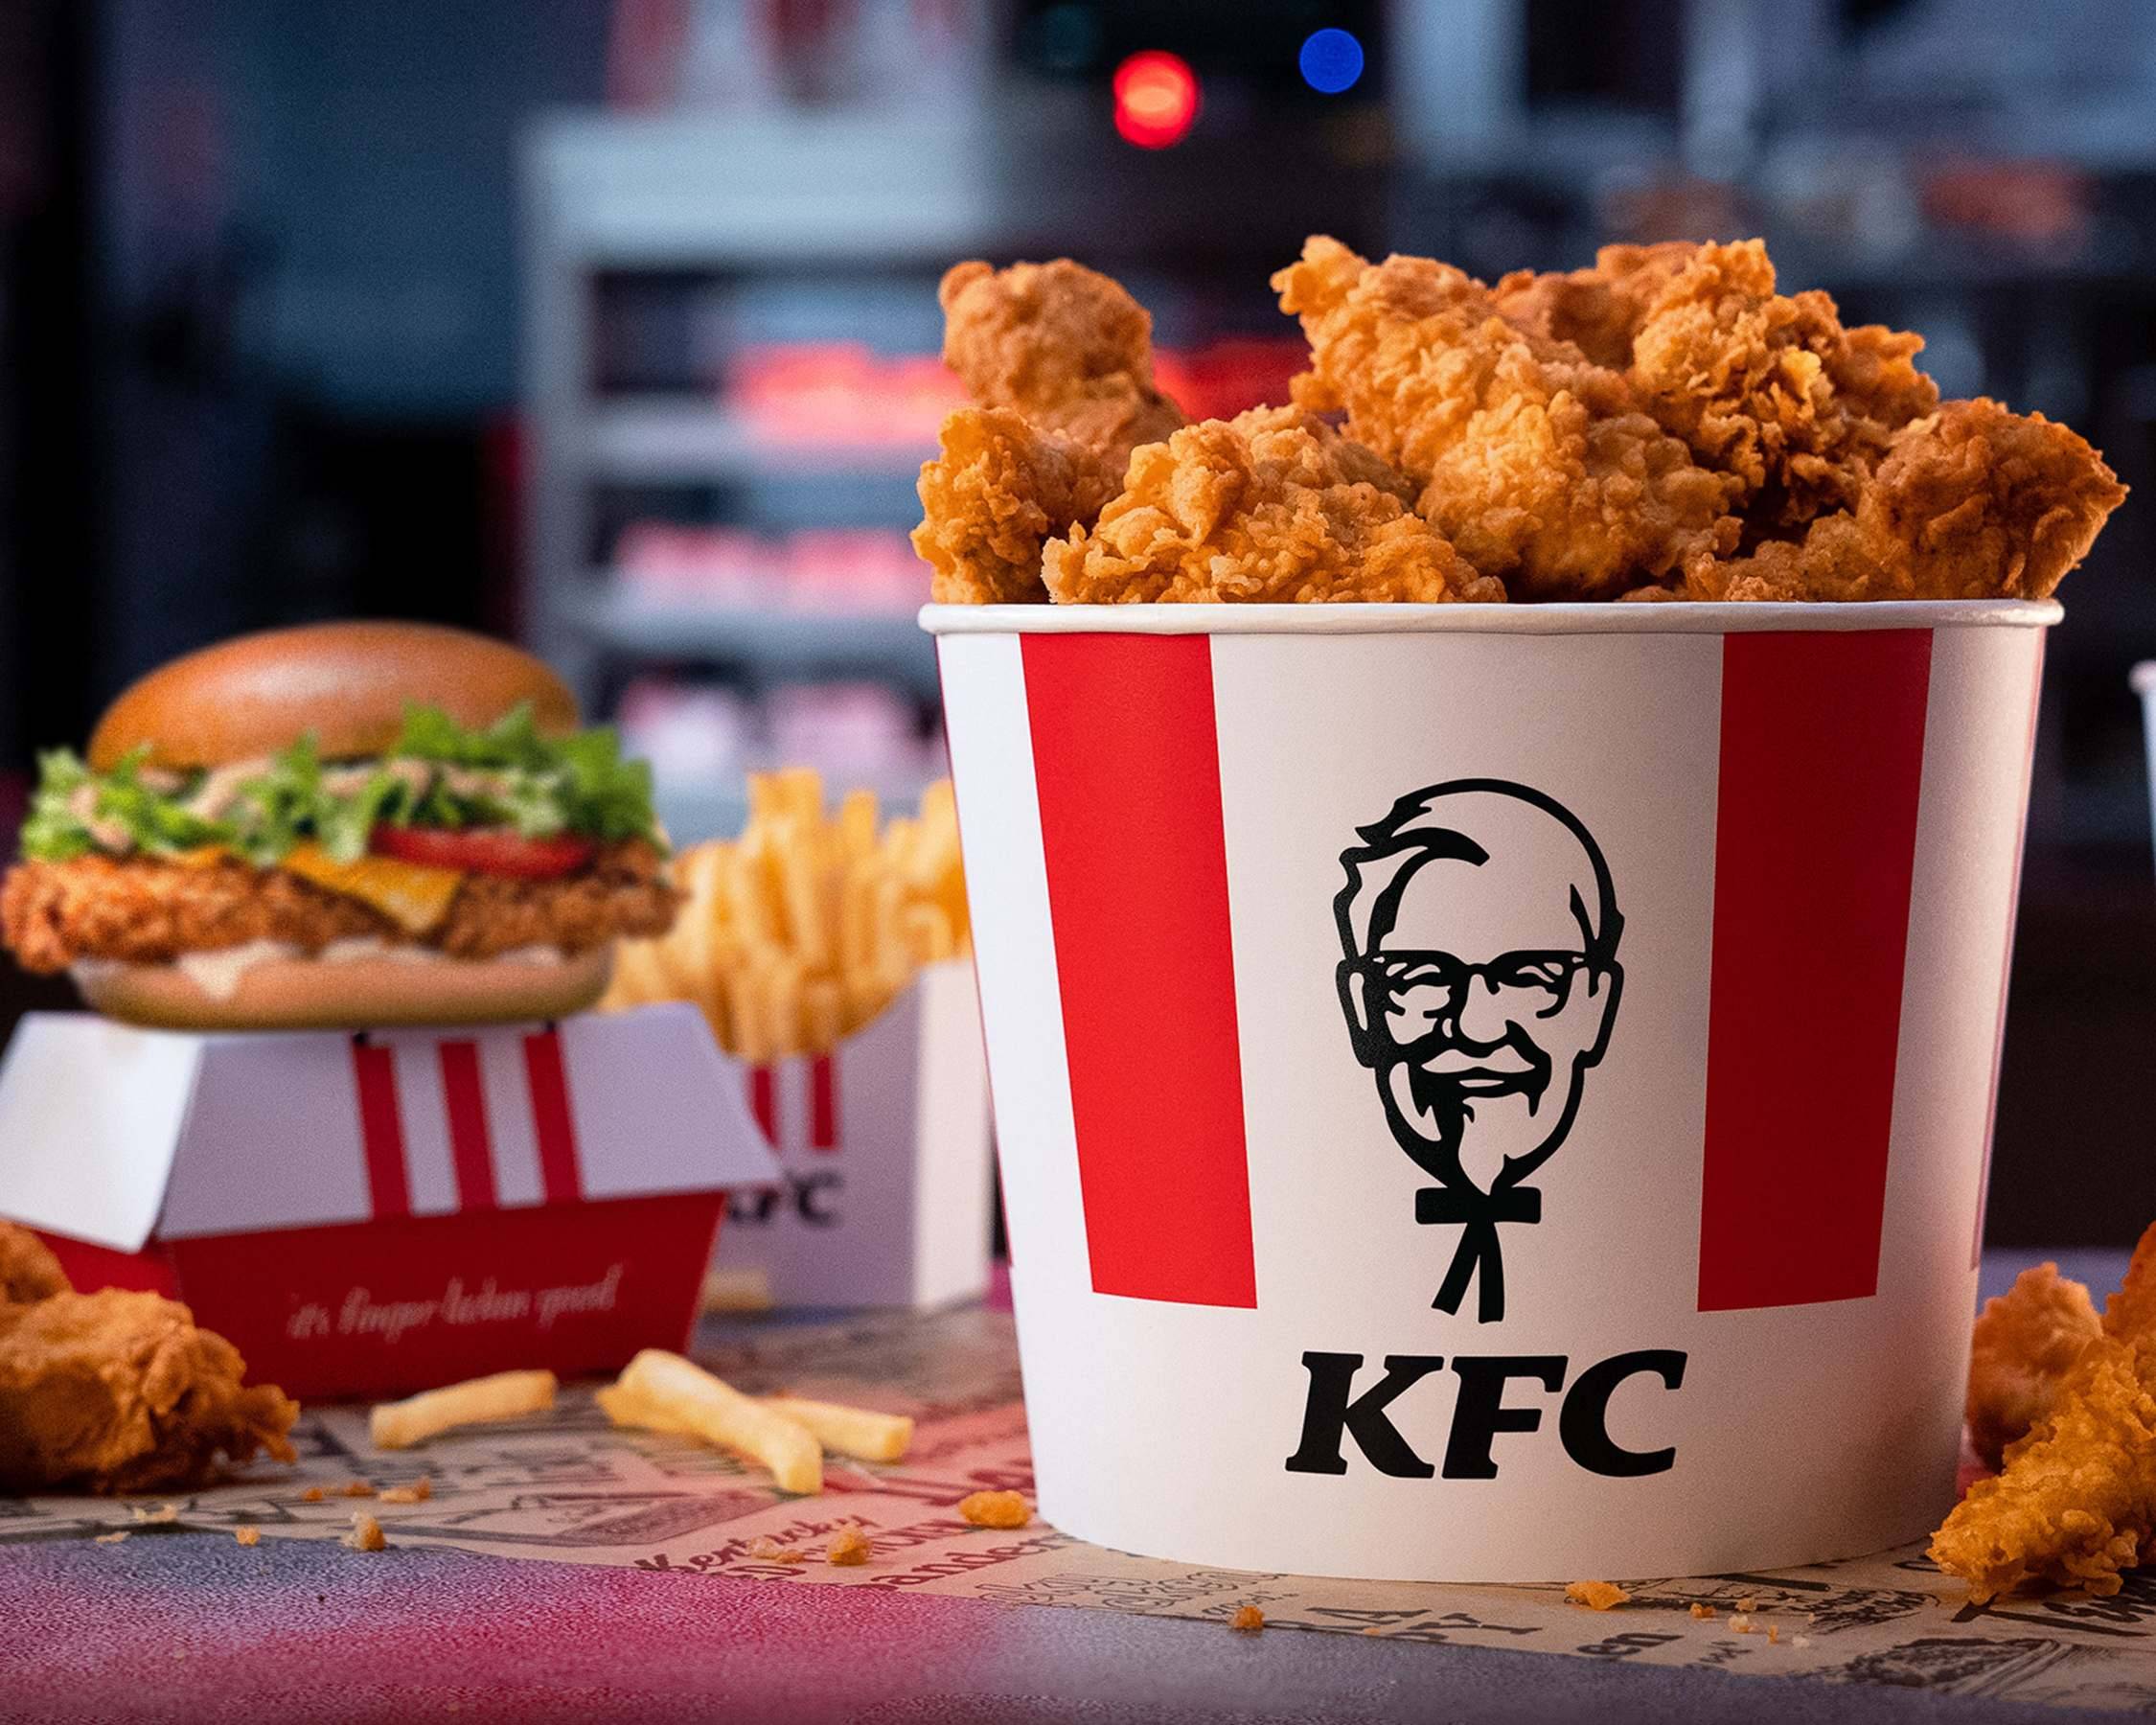 KFC Forced to Pay US$2K in Damages to Injured Customer